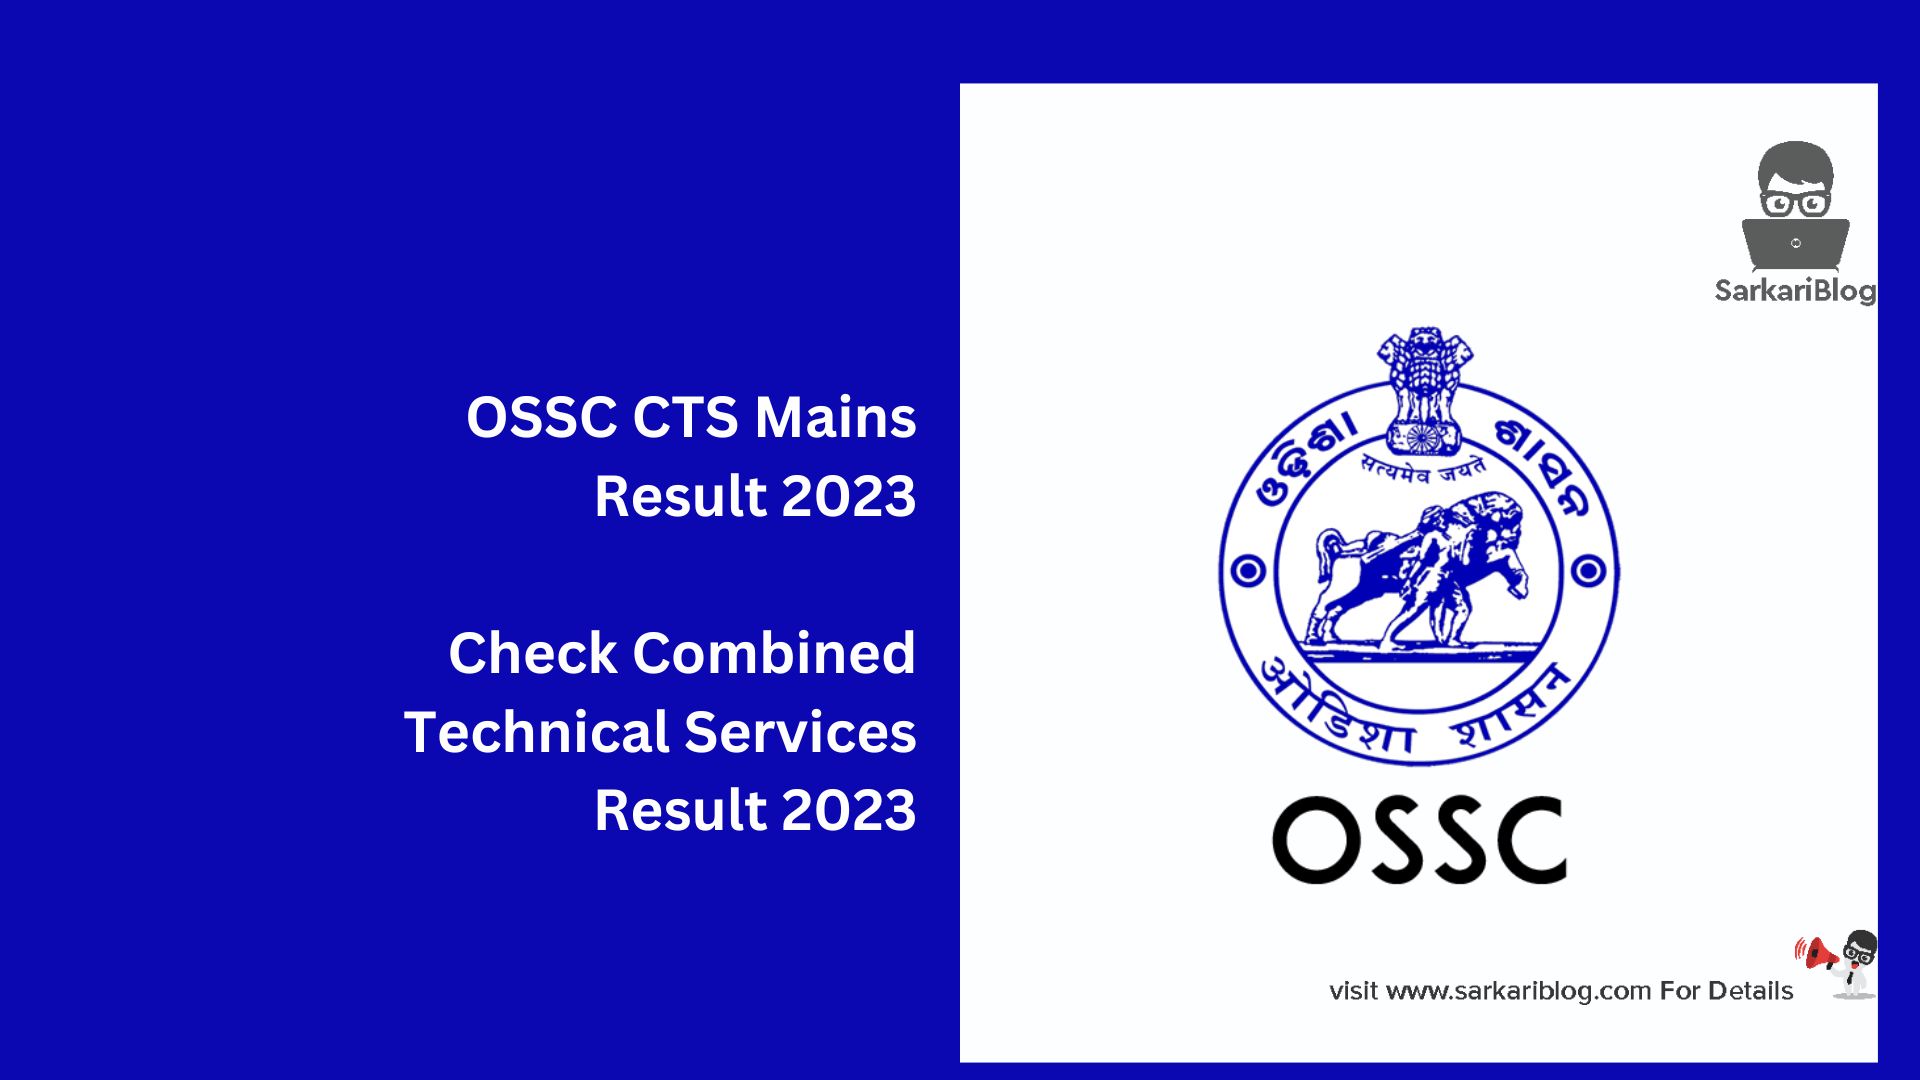 OSSC CTS Mains Result 2023